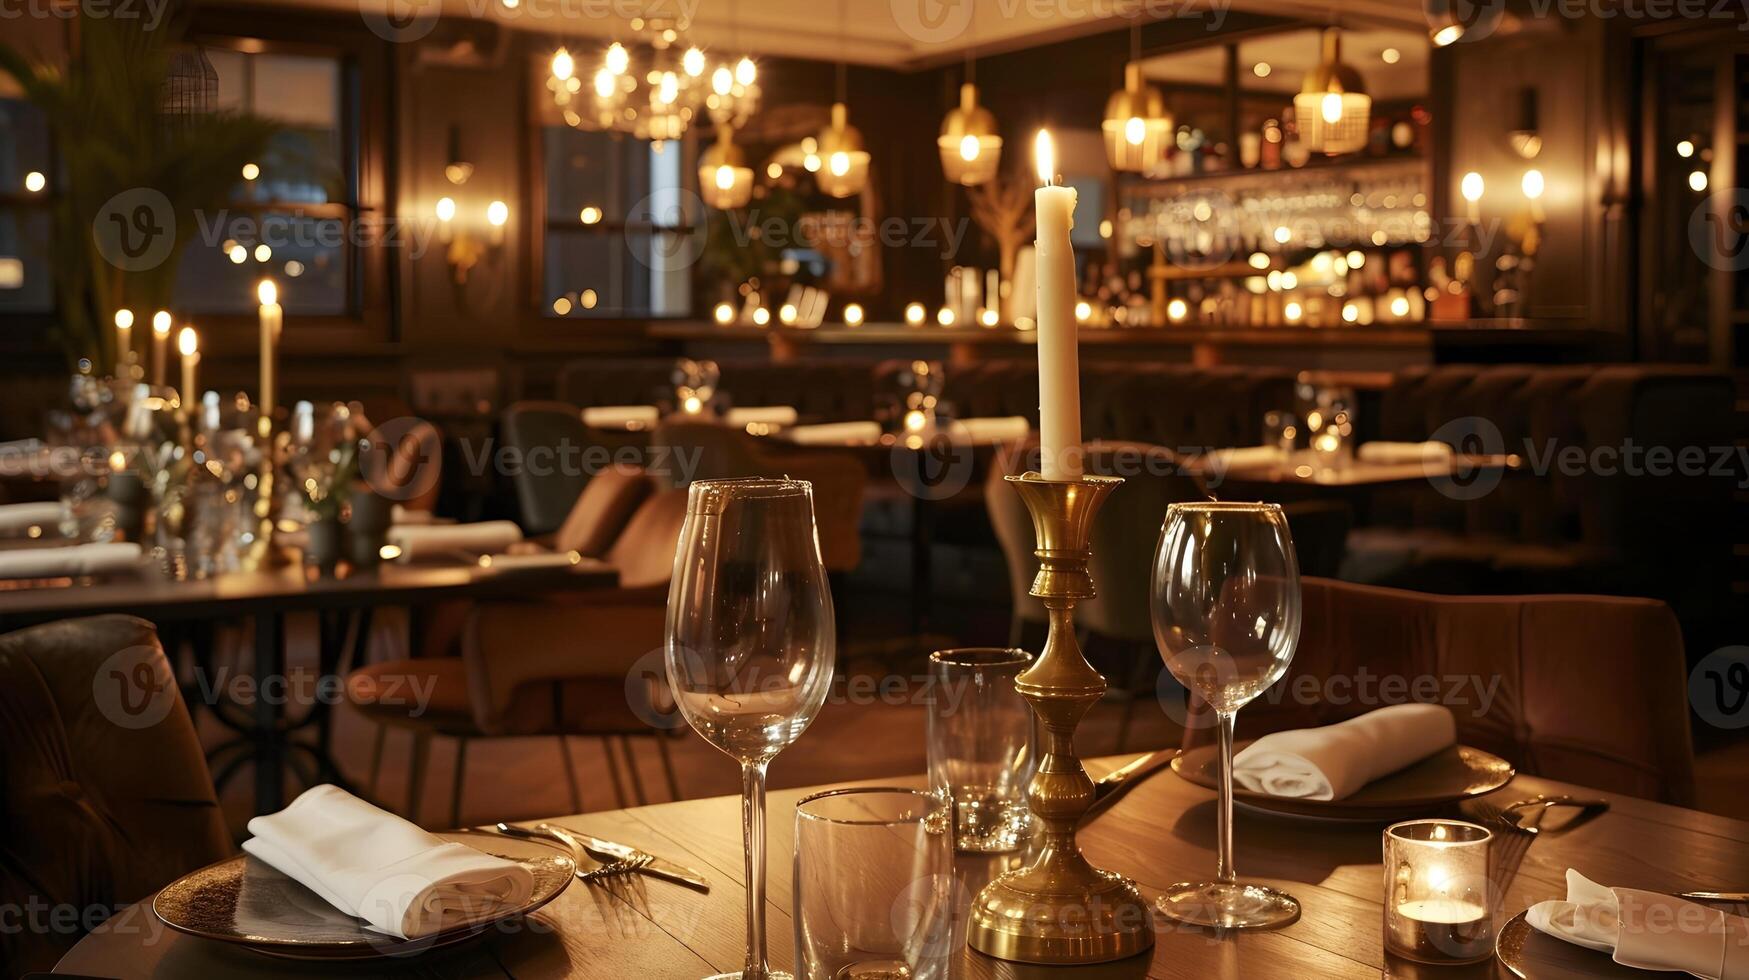 Cozy and Refined Upscale Restaurant Interior with Dimly Lit Ambiance and Elegant Table Setting photo